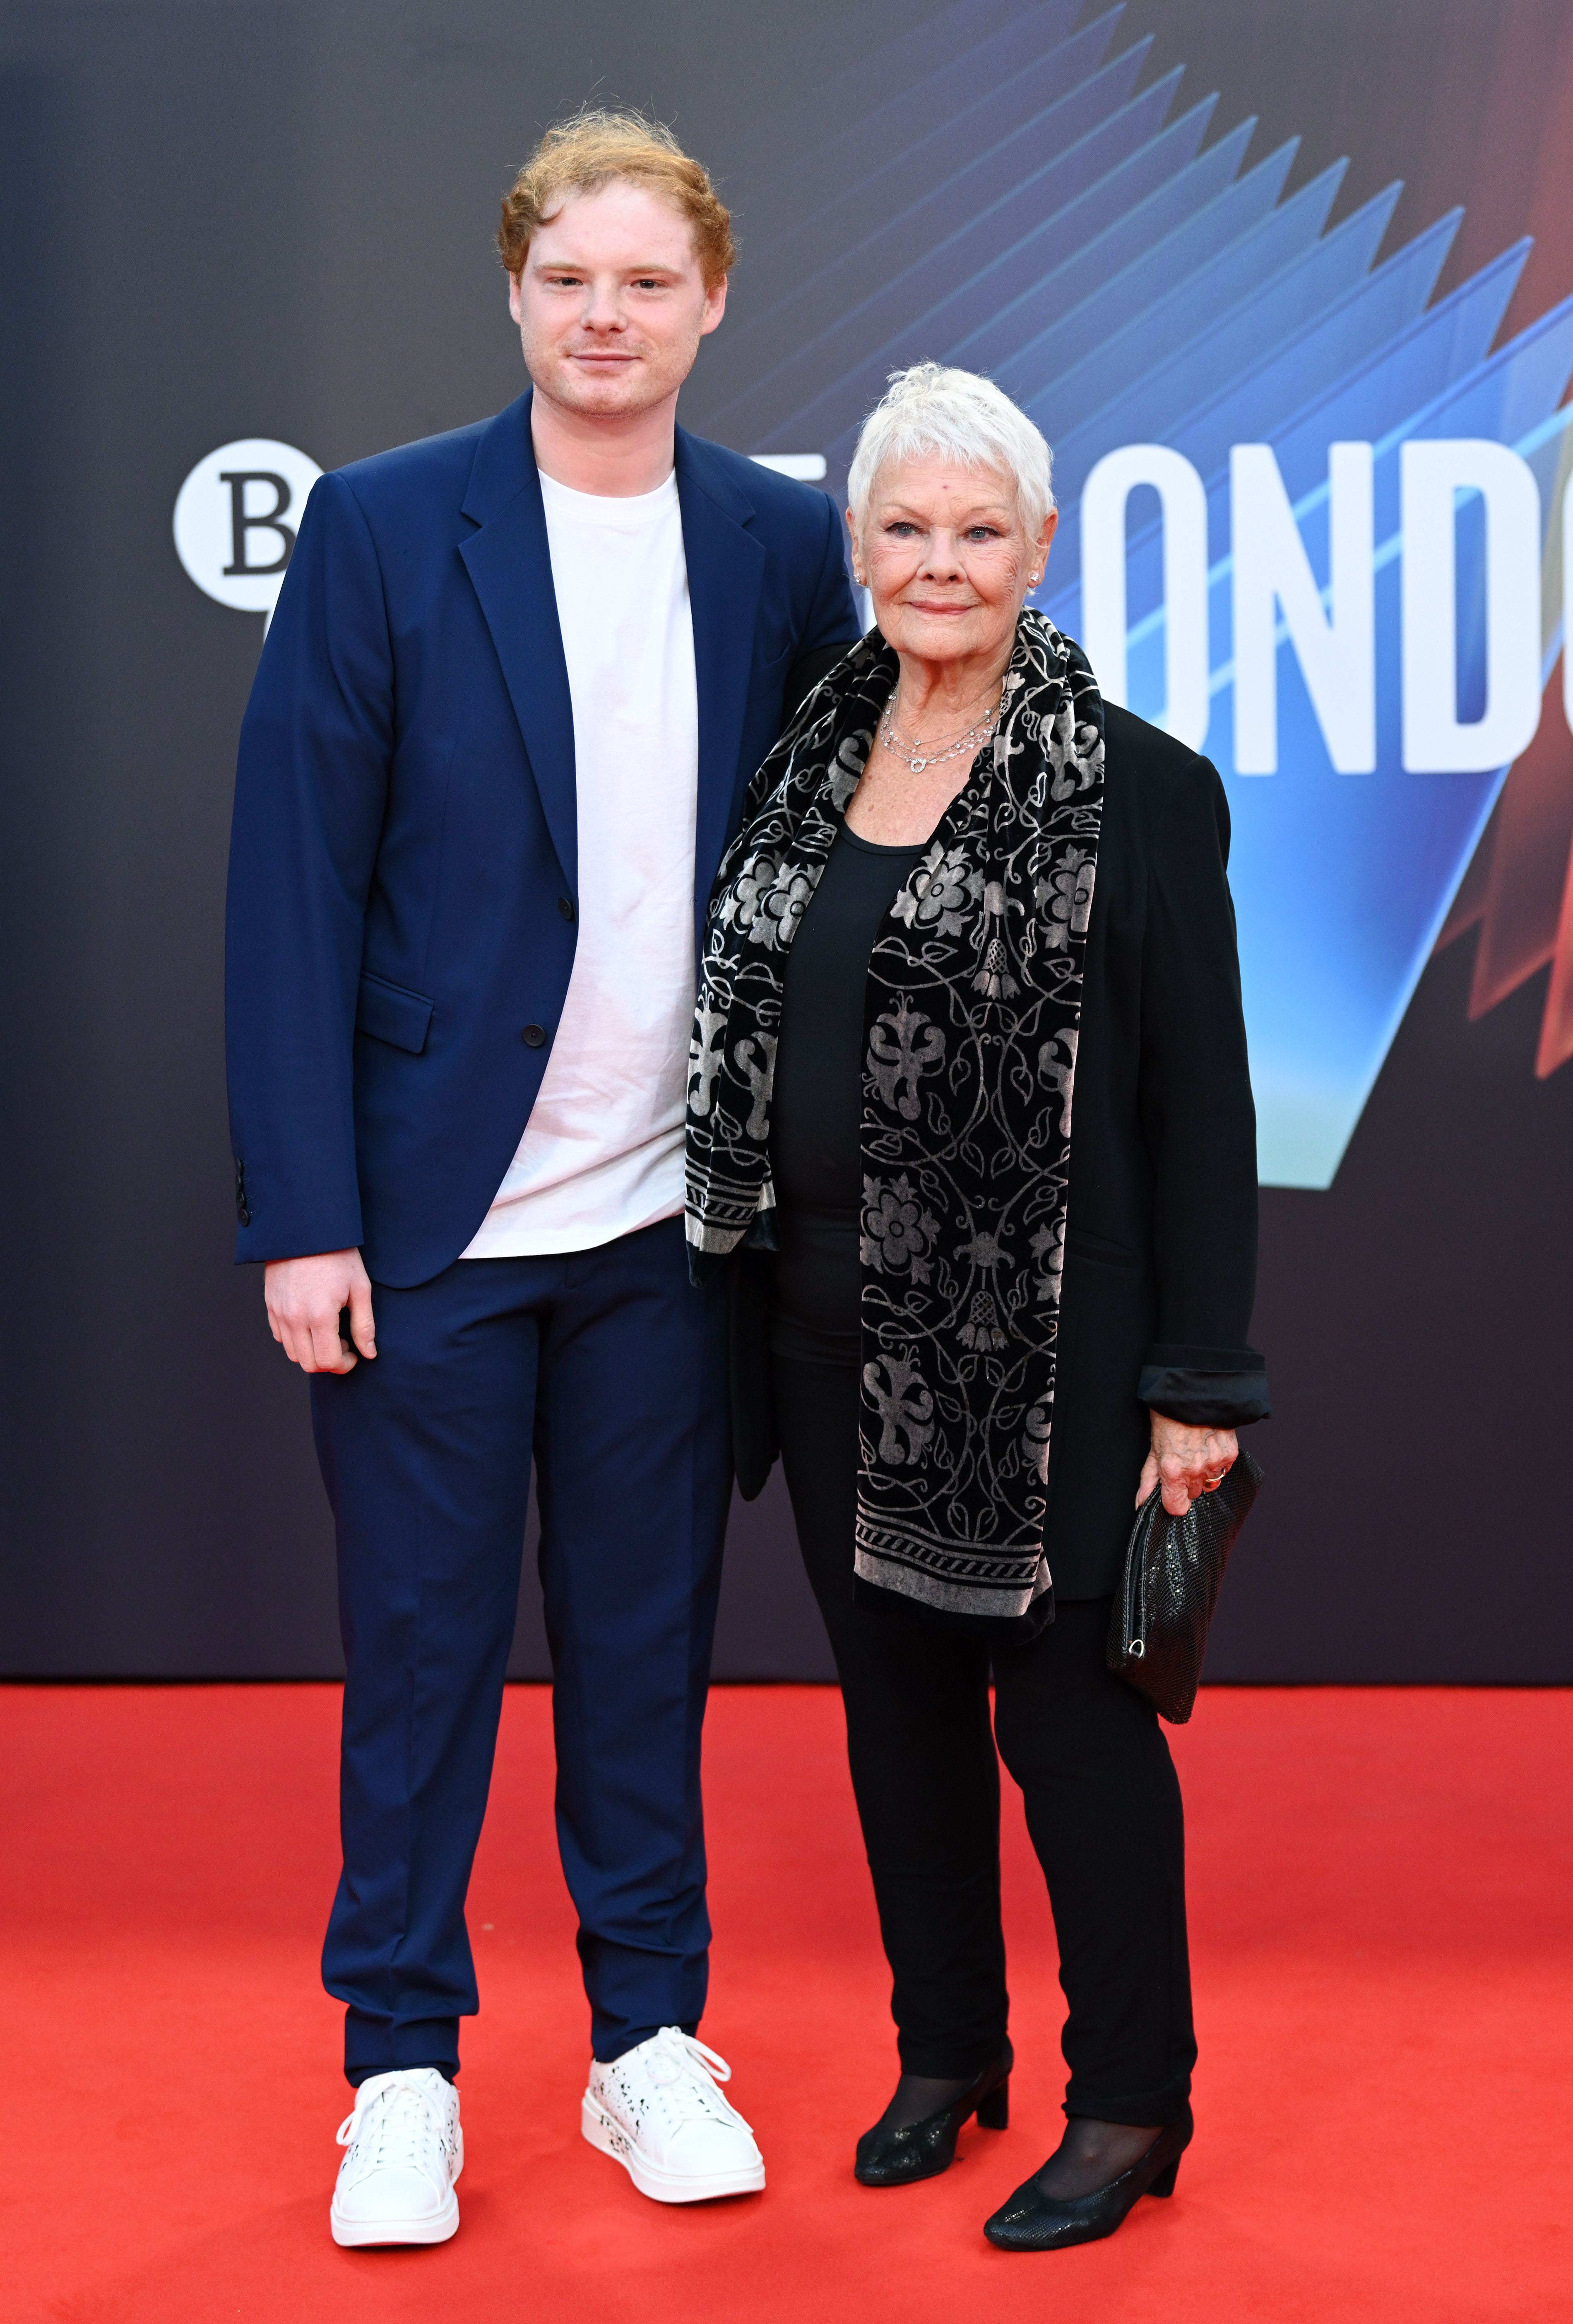 Dame Judi Dench and Sam Williams attend the "Belfast" European Premiere during the 65th BFI London Film Festival at The Royal Festival Hall in London, England on October 12, 2021. | Source: Getty Images